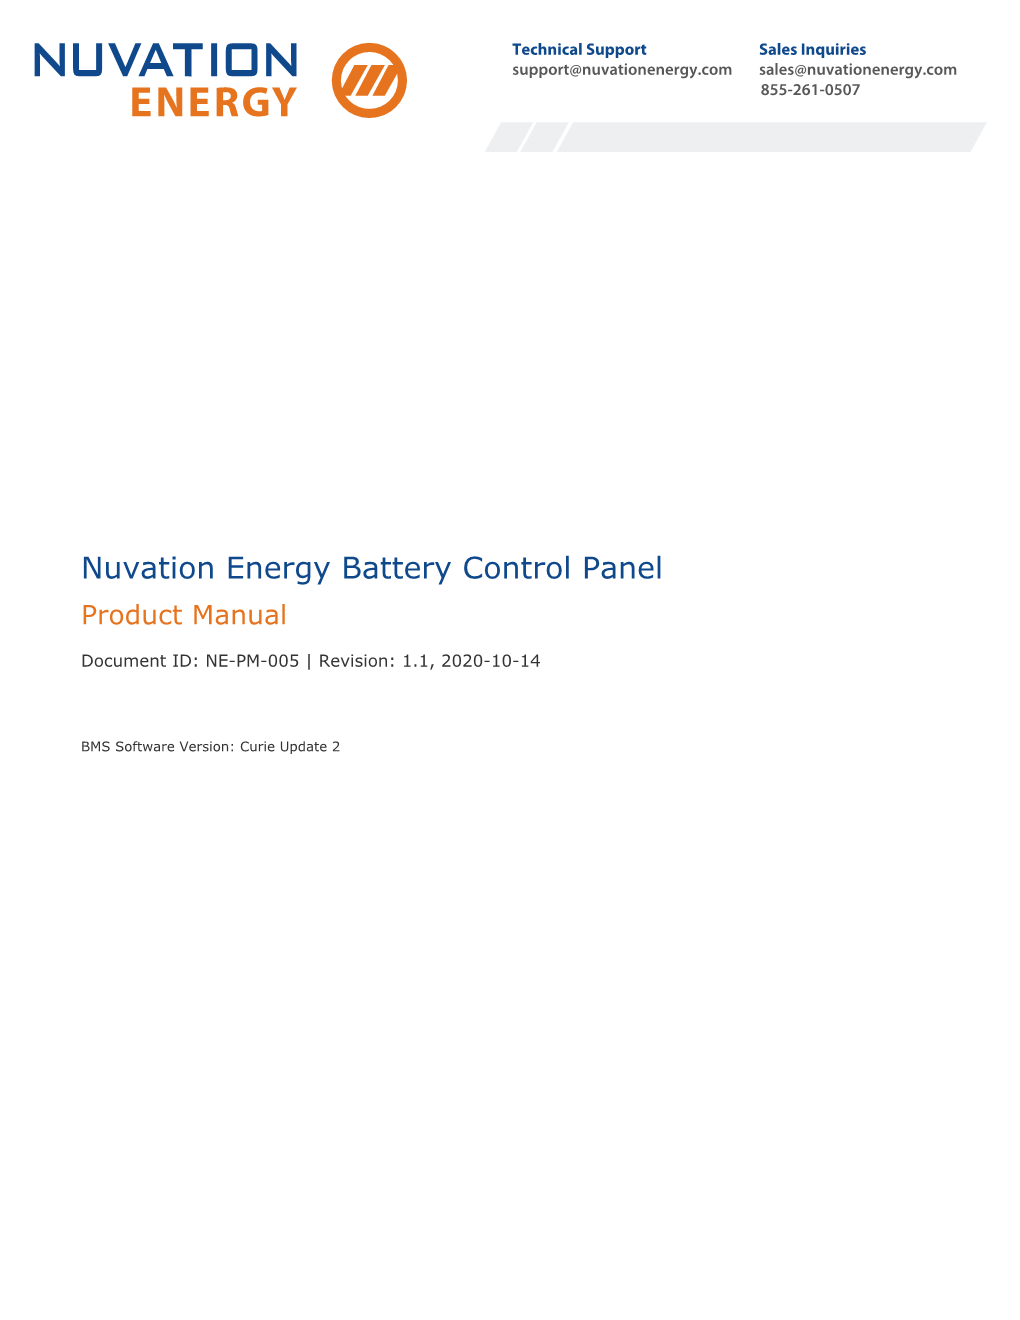 Nuvation Energy Battery Control Panel: Product Manual Is a Comprehensive Manual, Providing